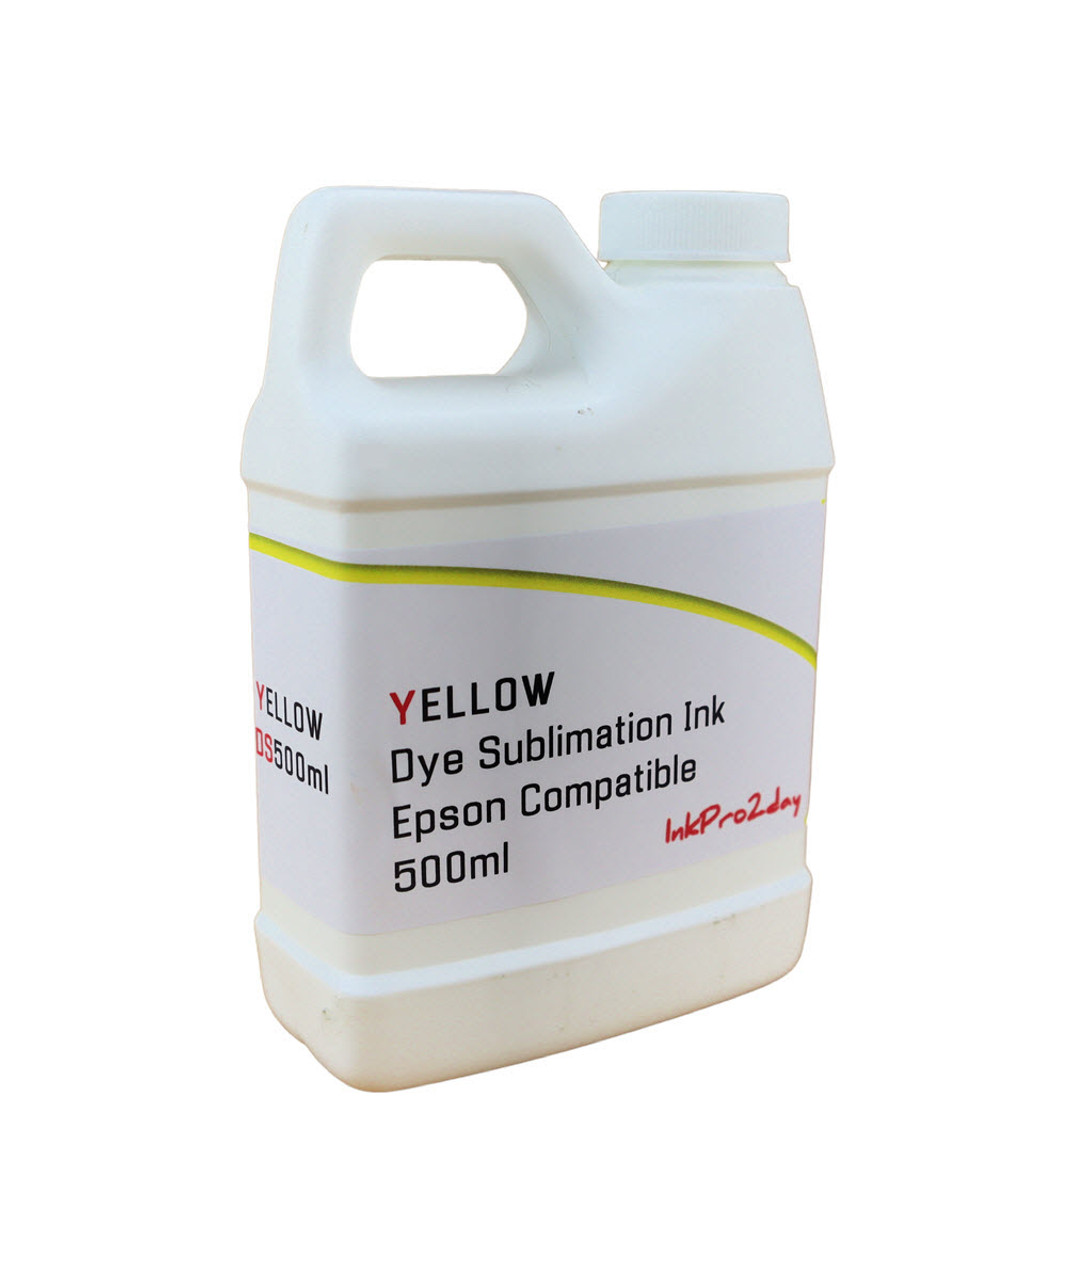 Yellow 500ml Bottle Dye Sublimation Ink for Epson WorkForce WF-7210, WorkForce WF-7710, WorkForce WF-7720 Printers